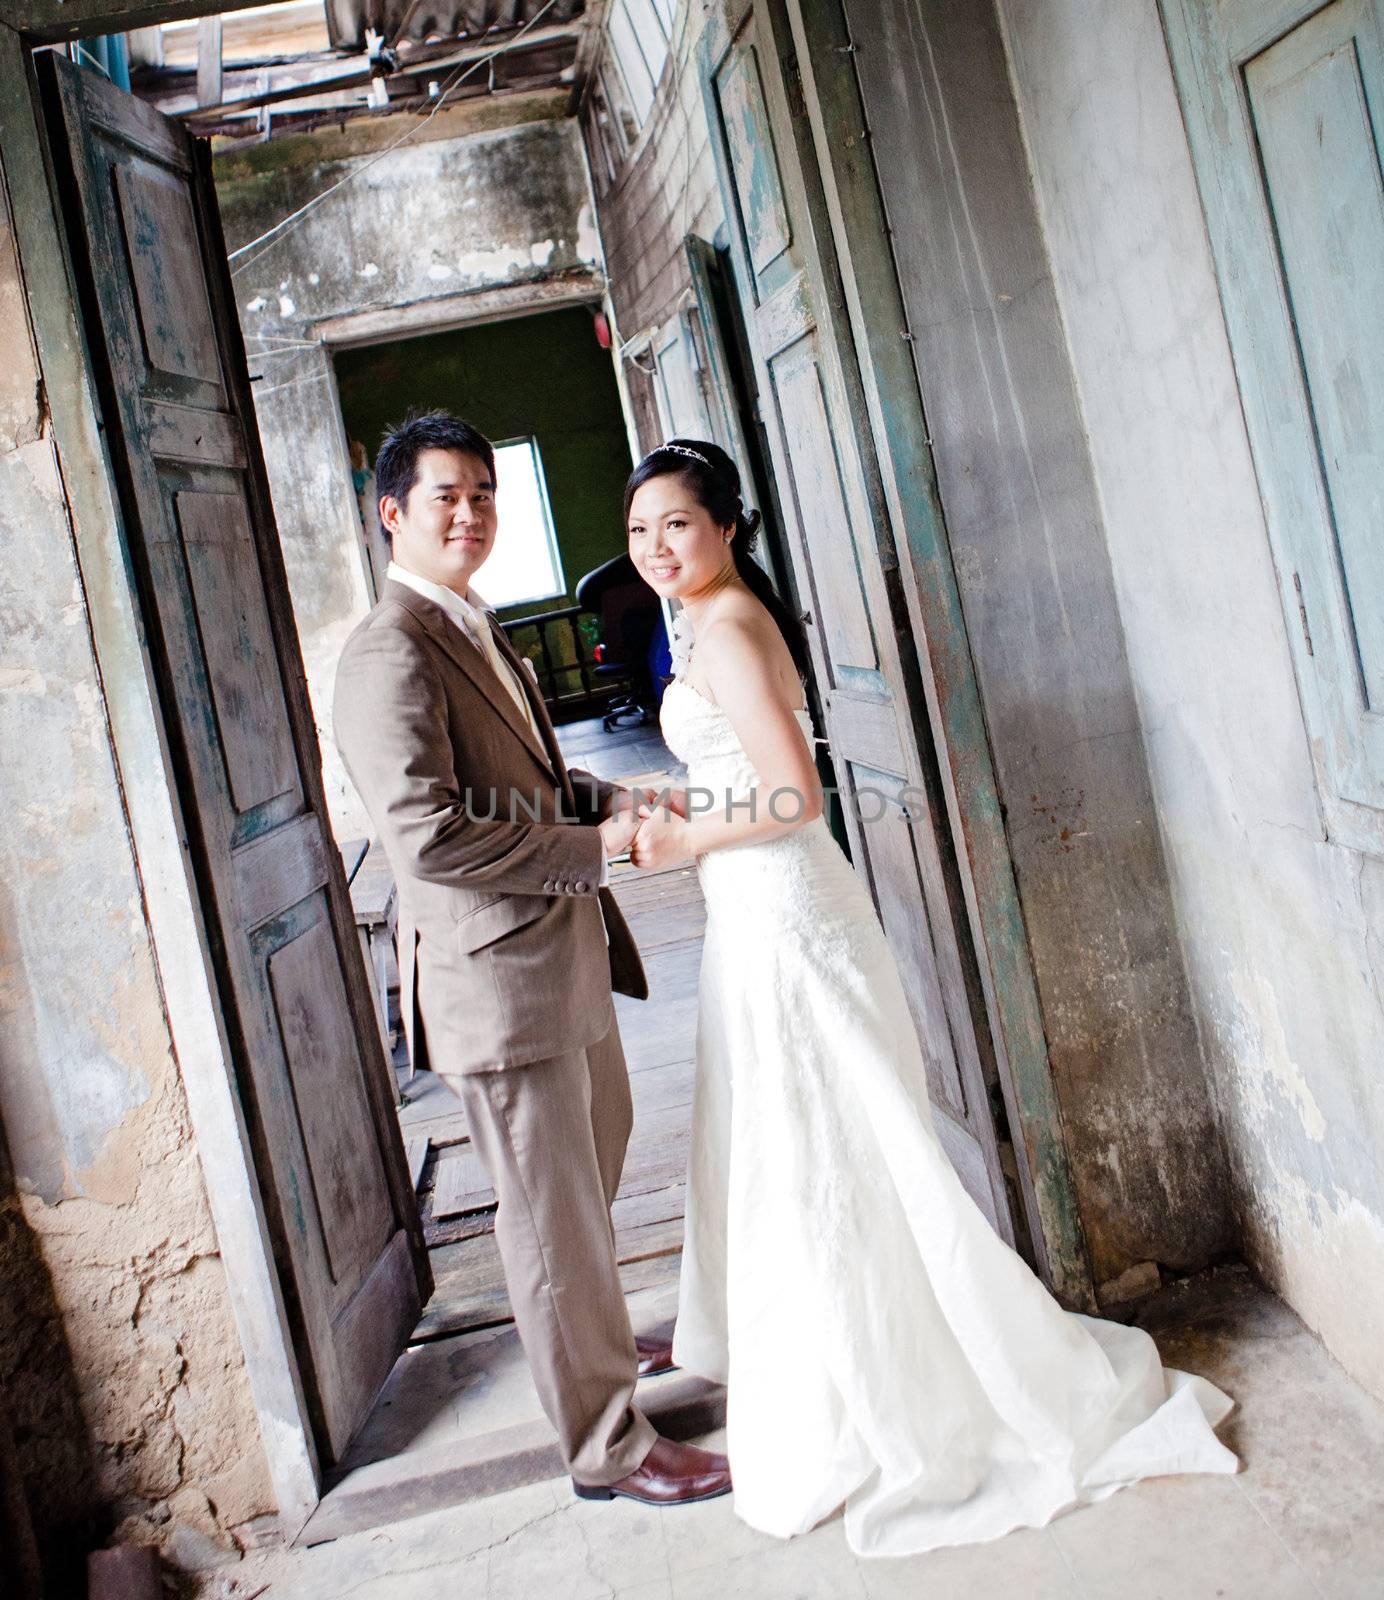 couples of groom and bride portrait in old church after wedding ceremony